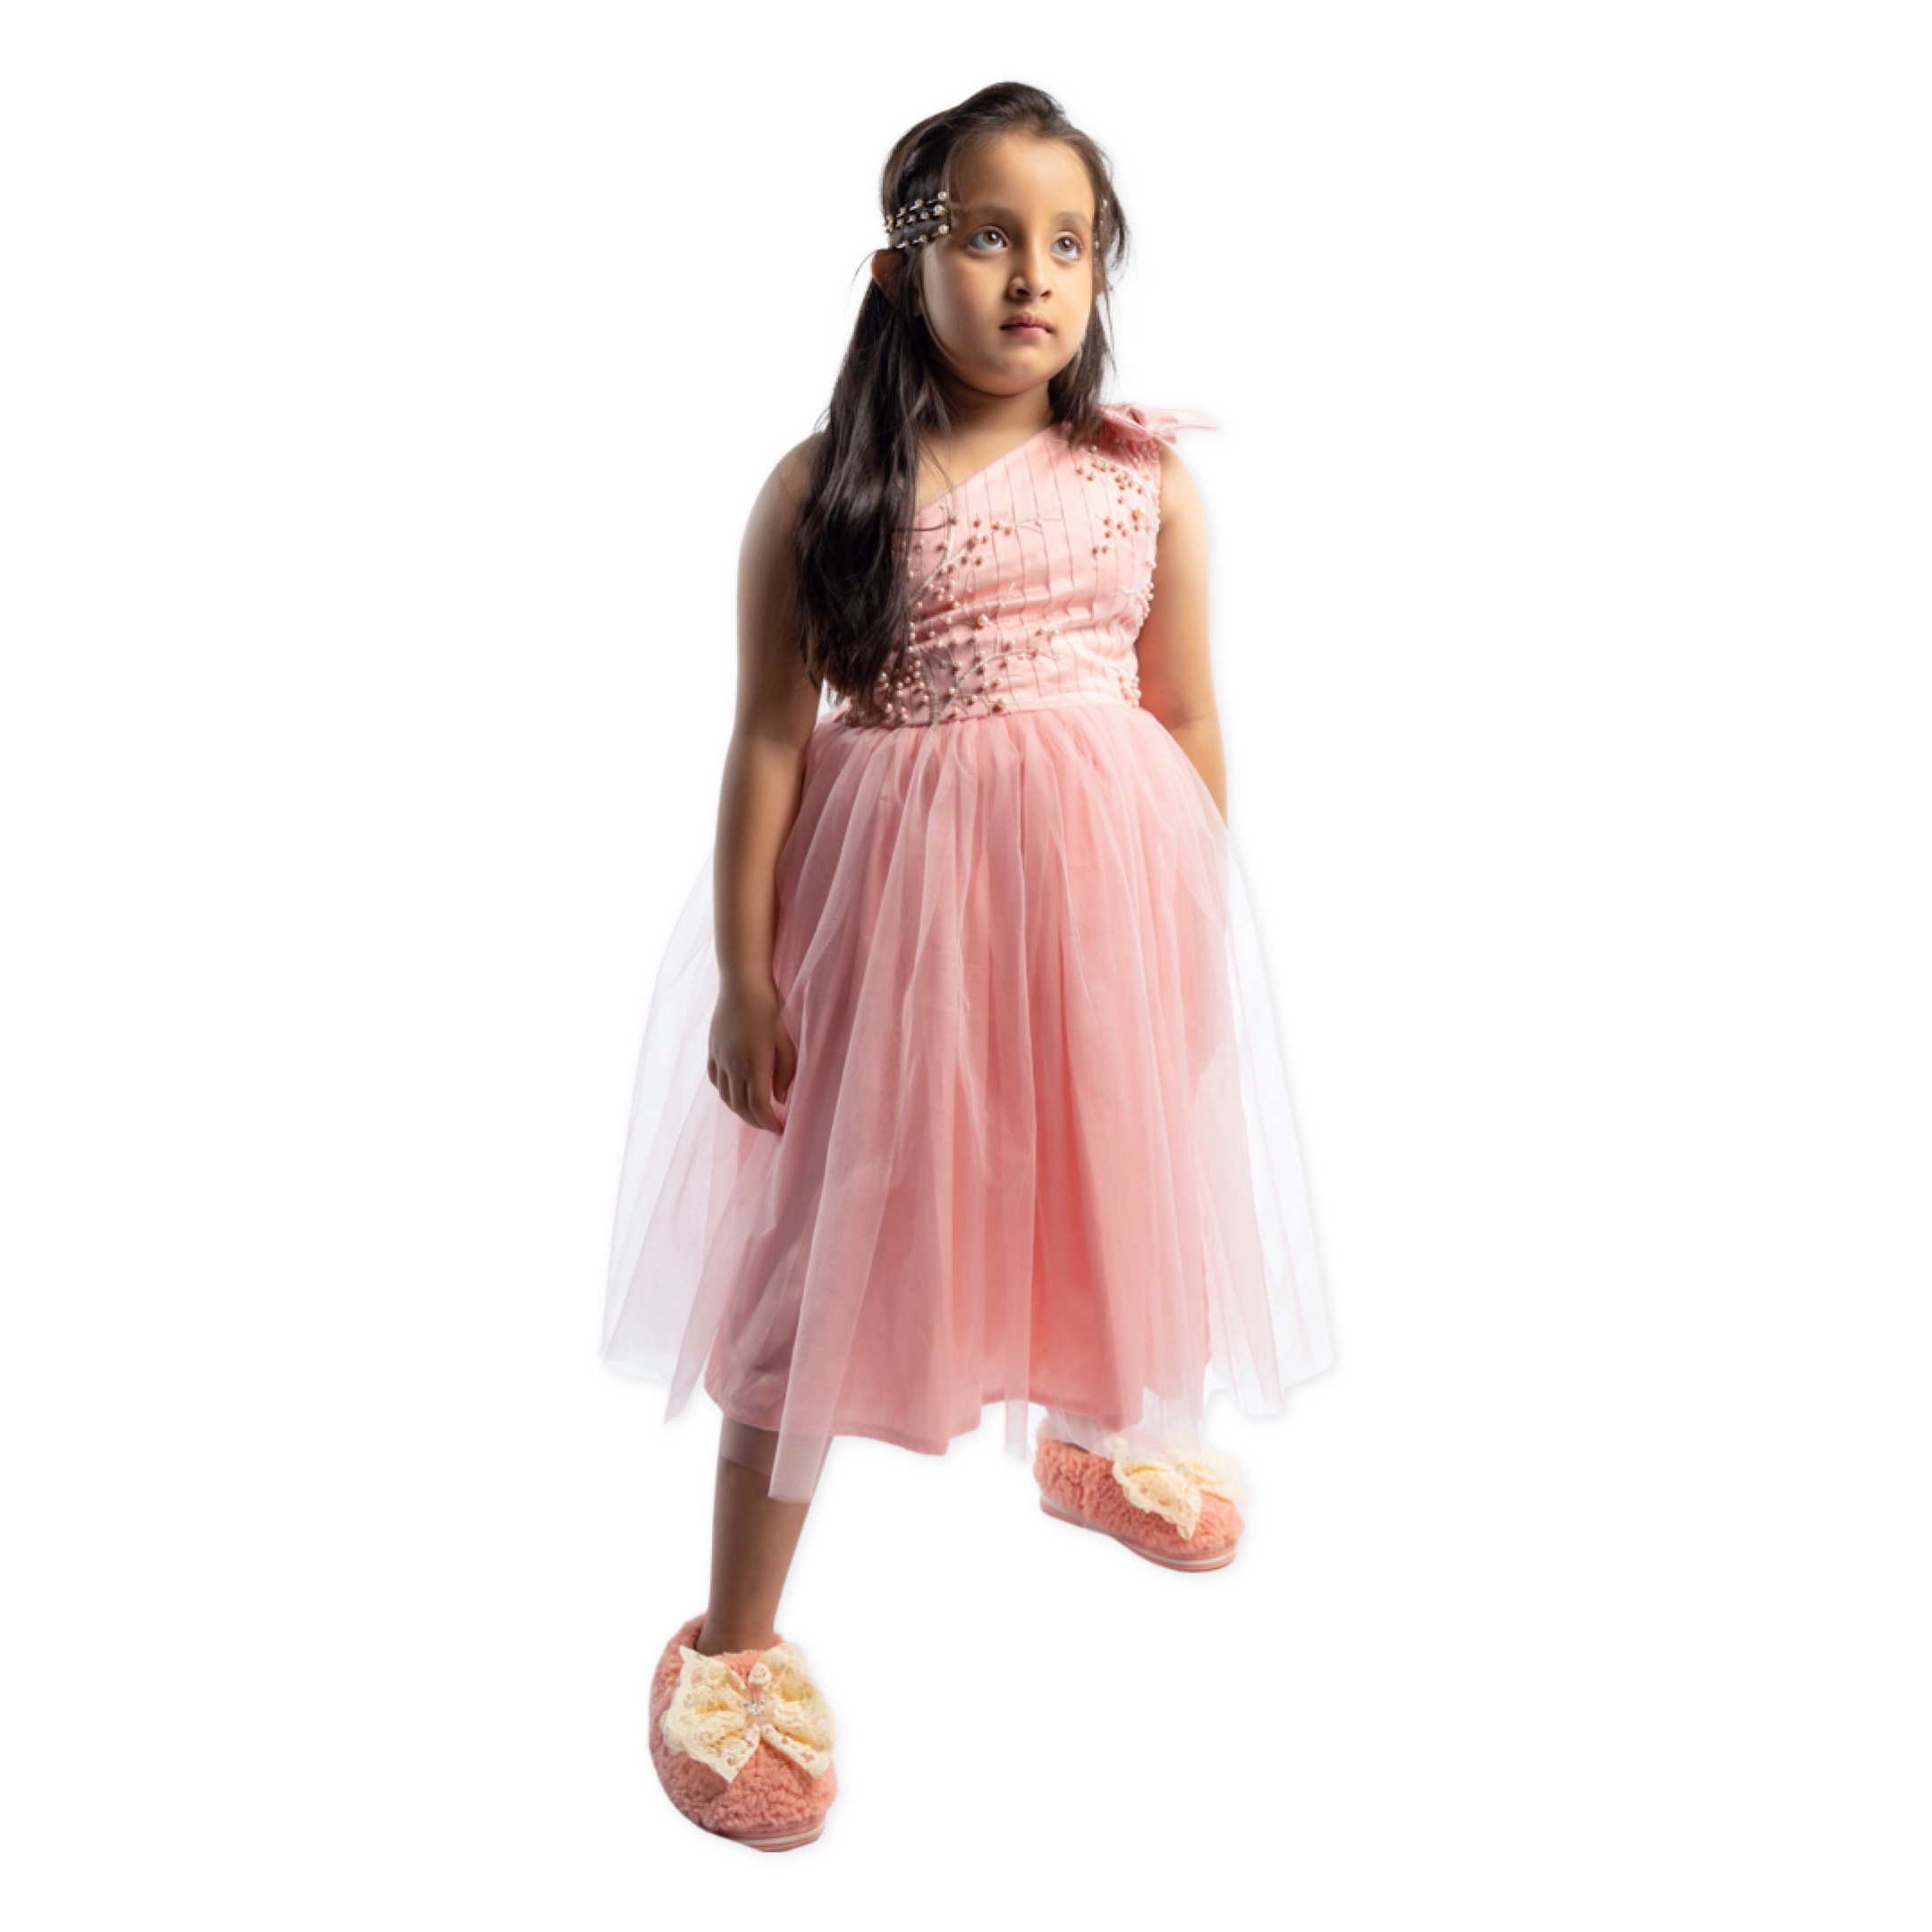 Zoul & Zera Stylish sleeveless one shoulder frock & satin bow detailing with side zip closure frock for girls